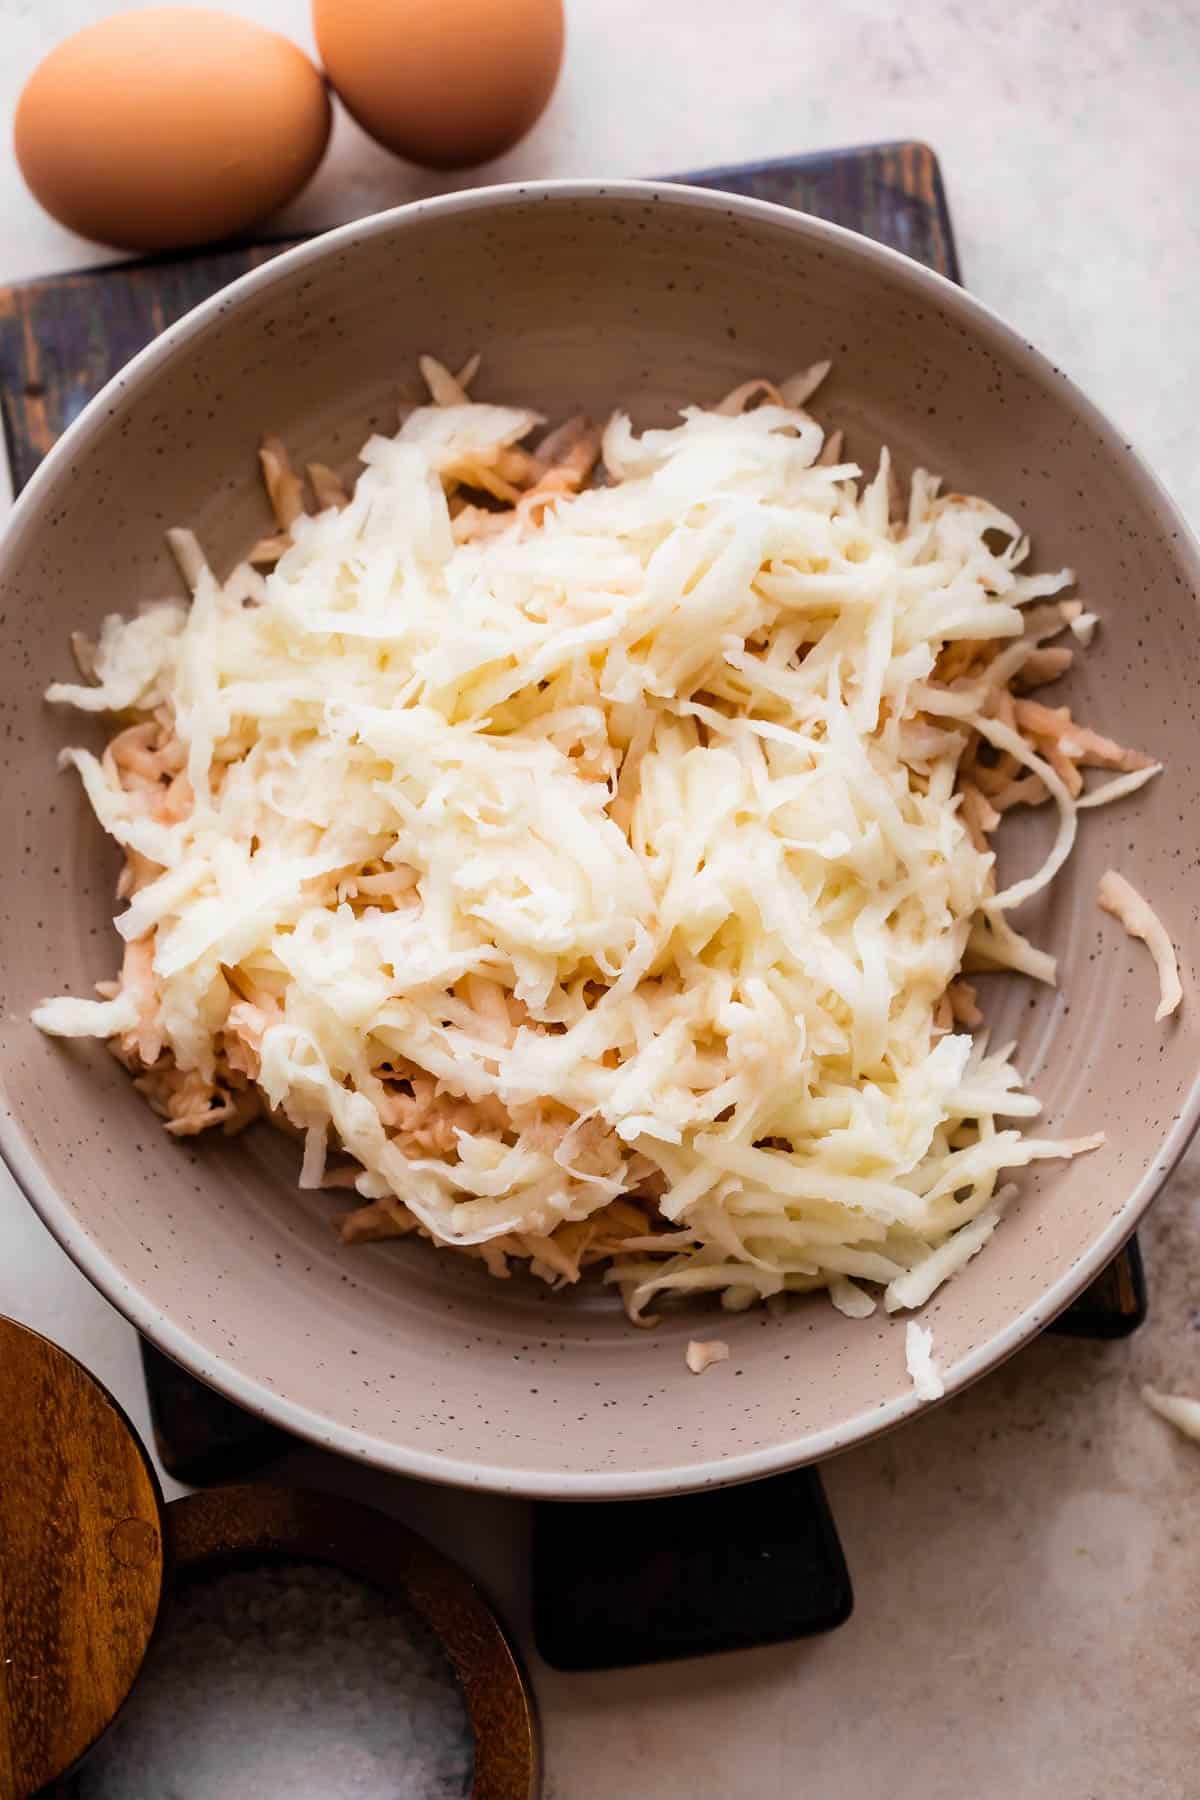 grated potato and onion mixture in a brown bowl with two brown eggs placed next to the bowl.